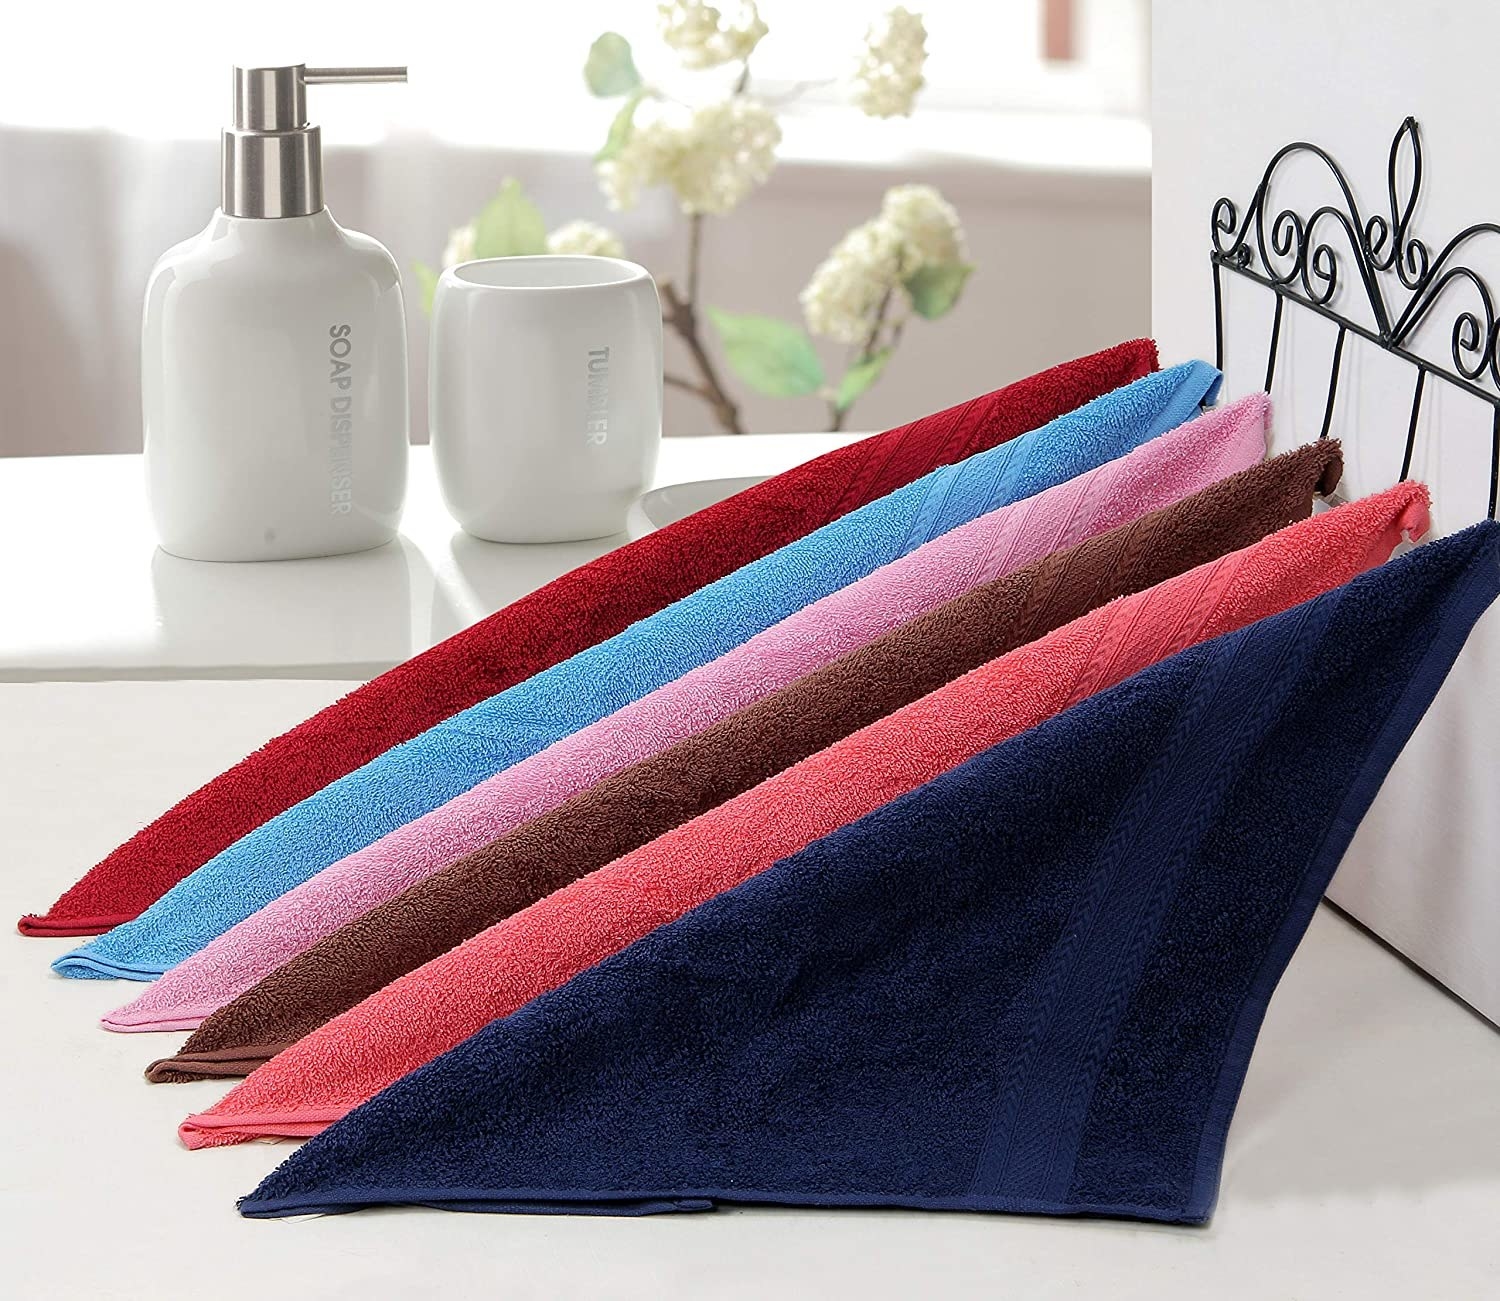 A set of multi-coloured towels arranged on a bathroom stand. 